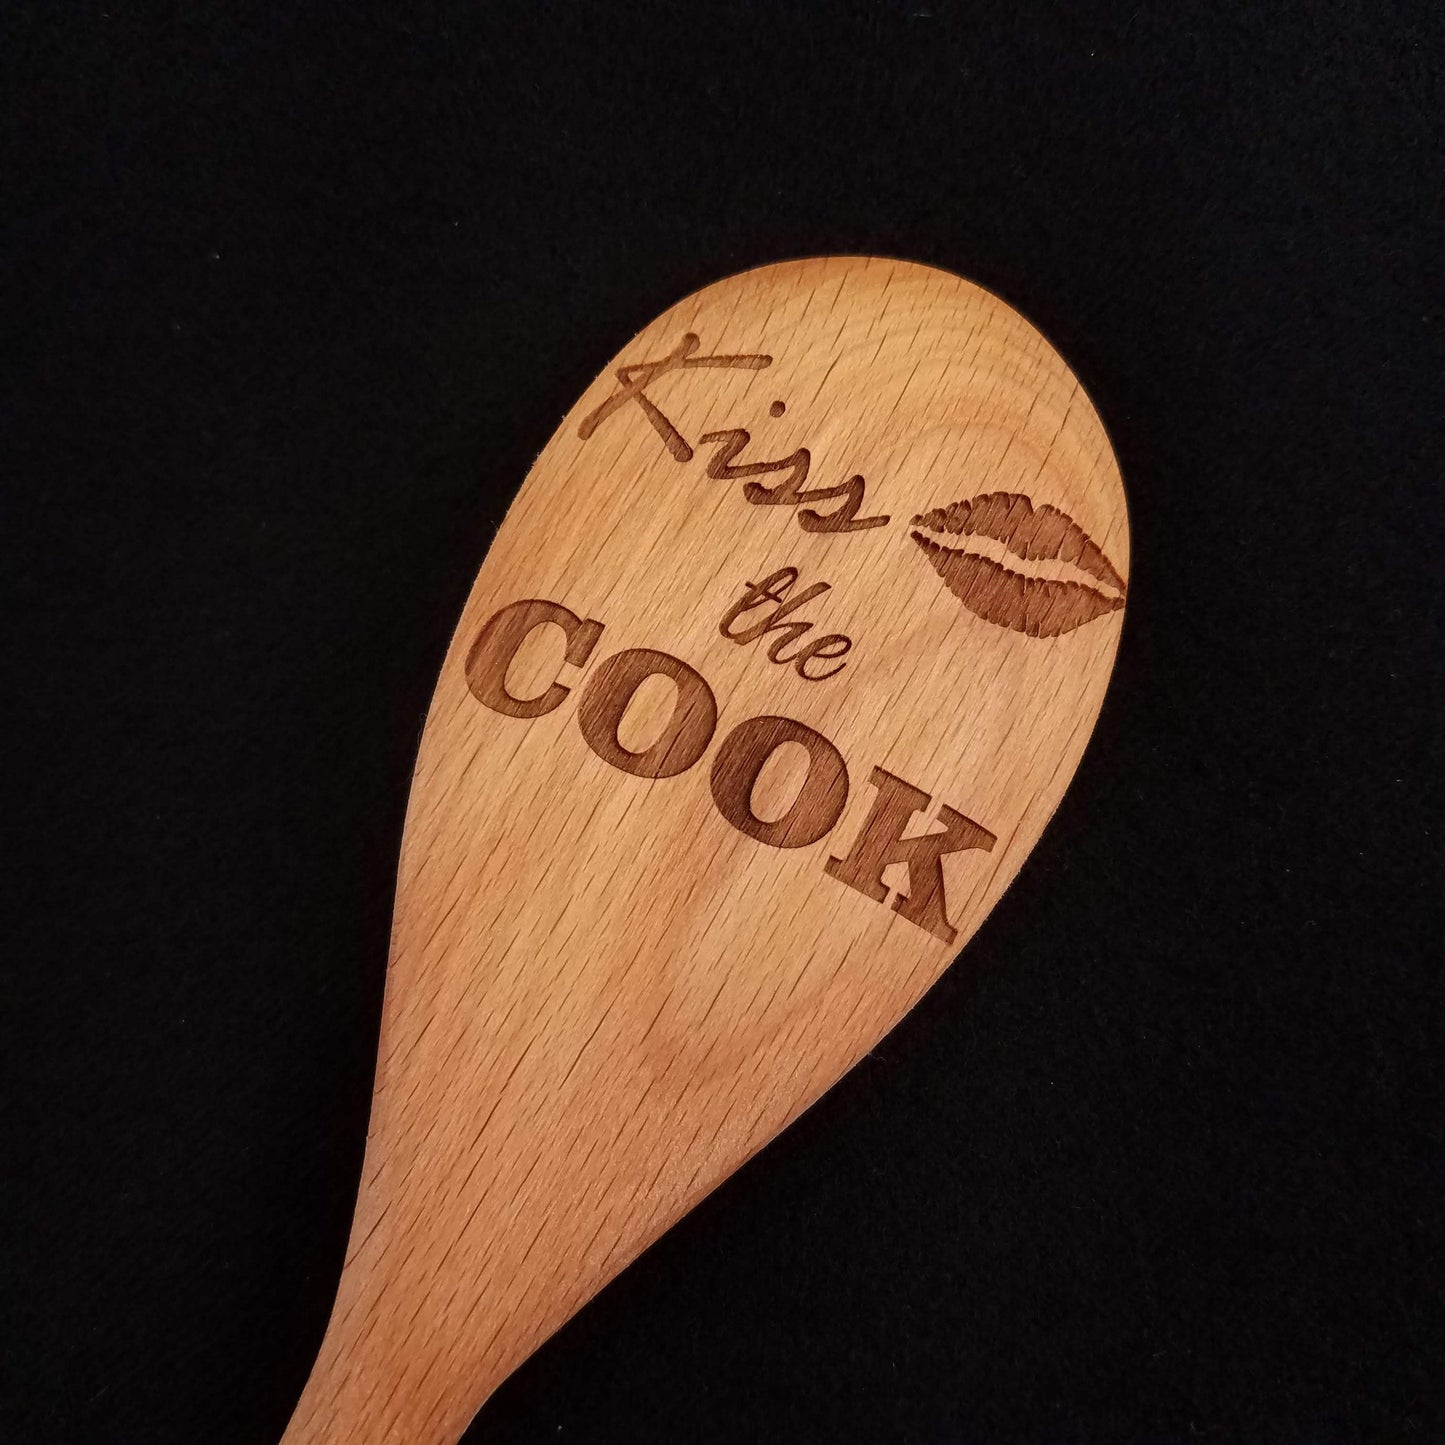 Beech wood spoon laser engraved with Kiss the Cook and a lip design